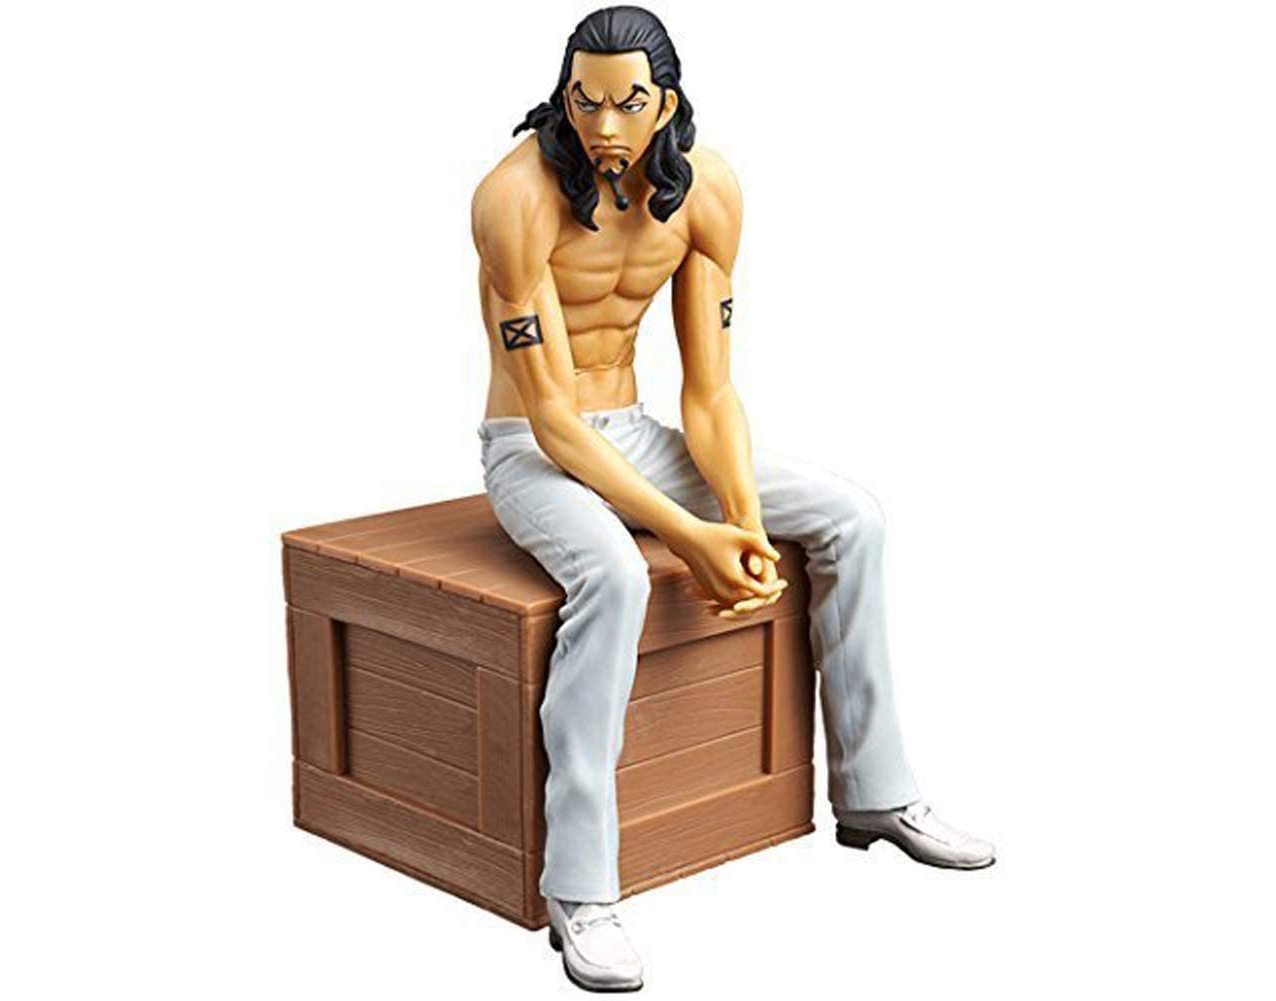  One Piece The Naked Body Calendar Volume 1 Rob Lucci A Action Figure